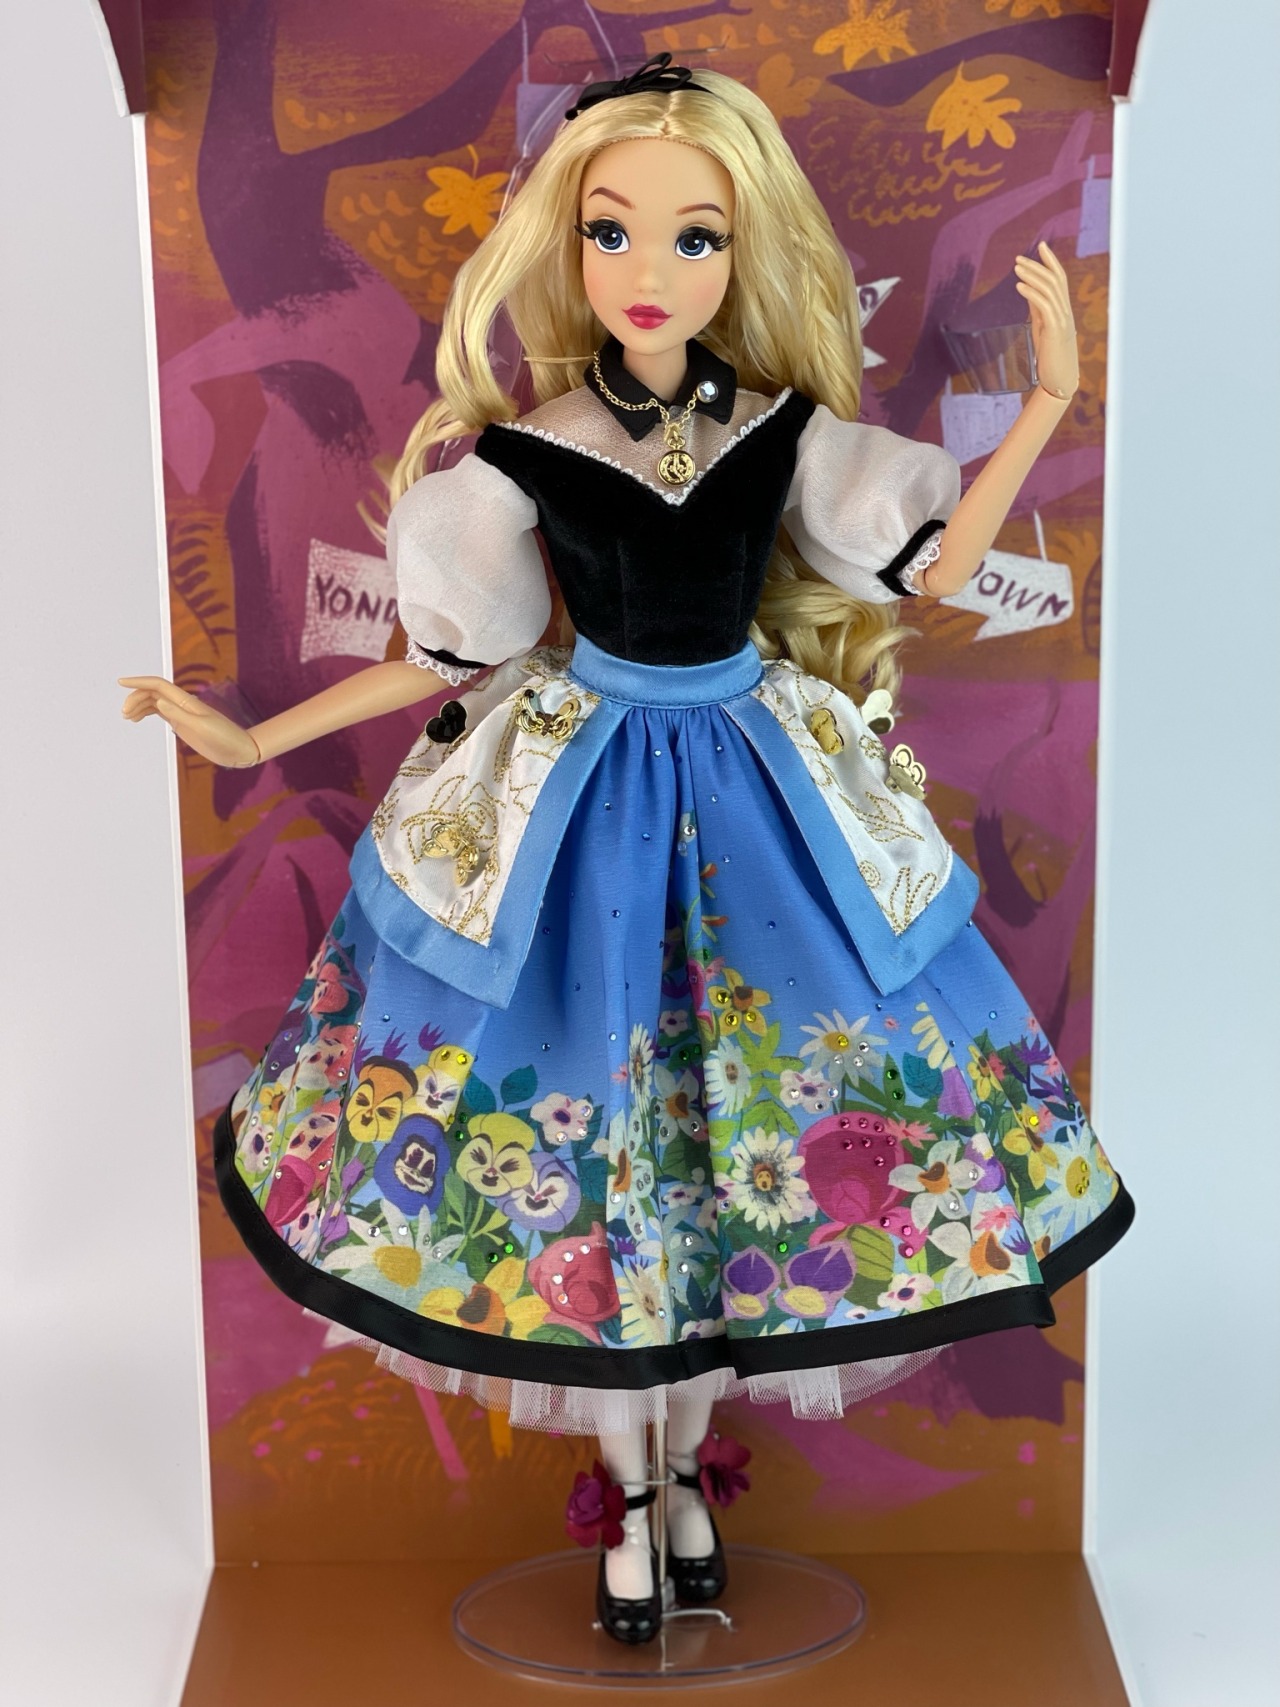 Alice in Wonderland: Disney Limited Edition doll Review 